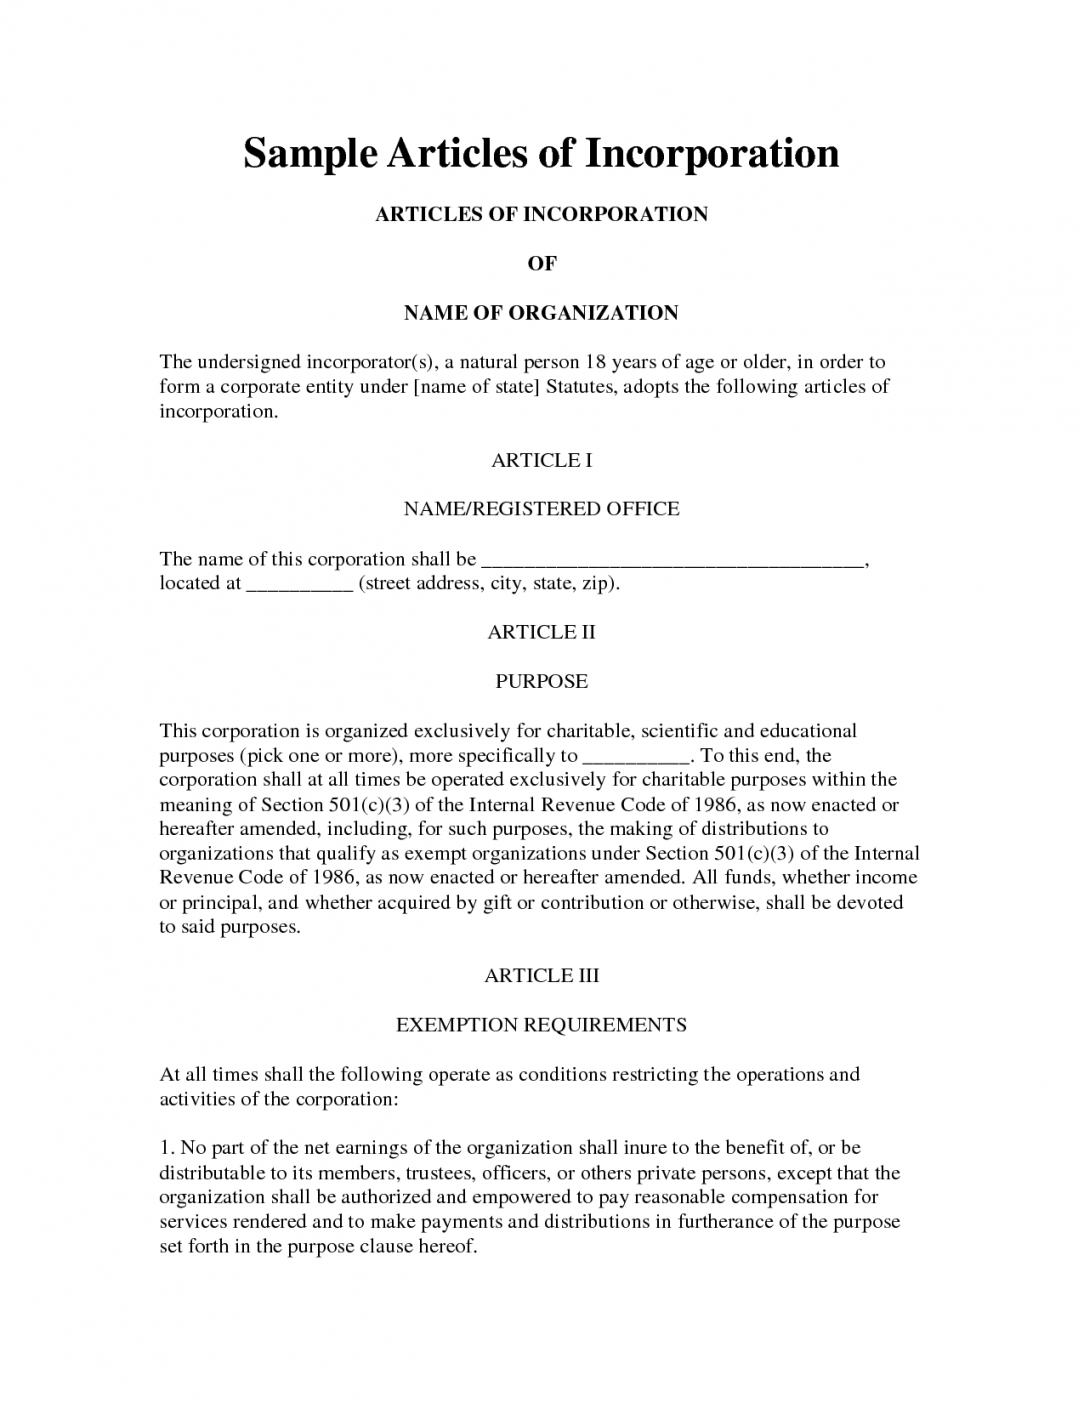 Articles Of Incorporation Example